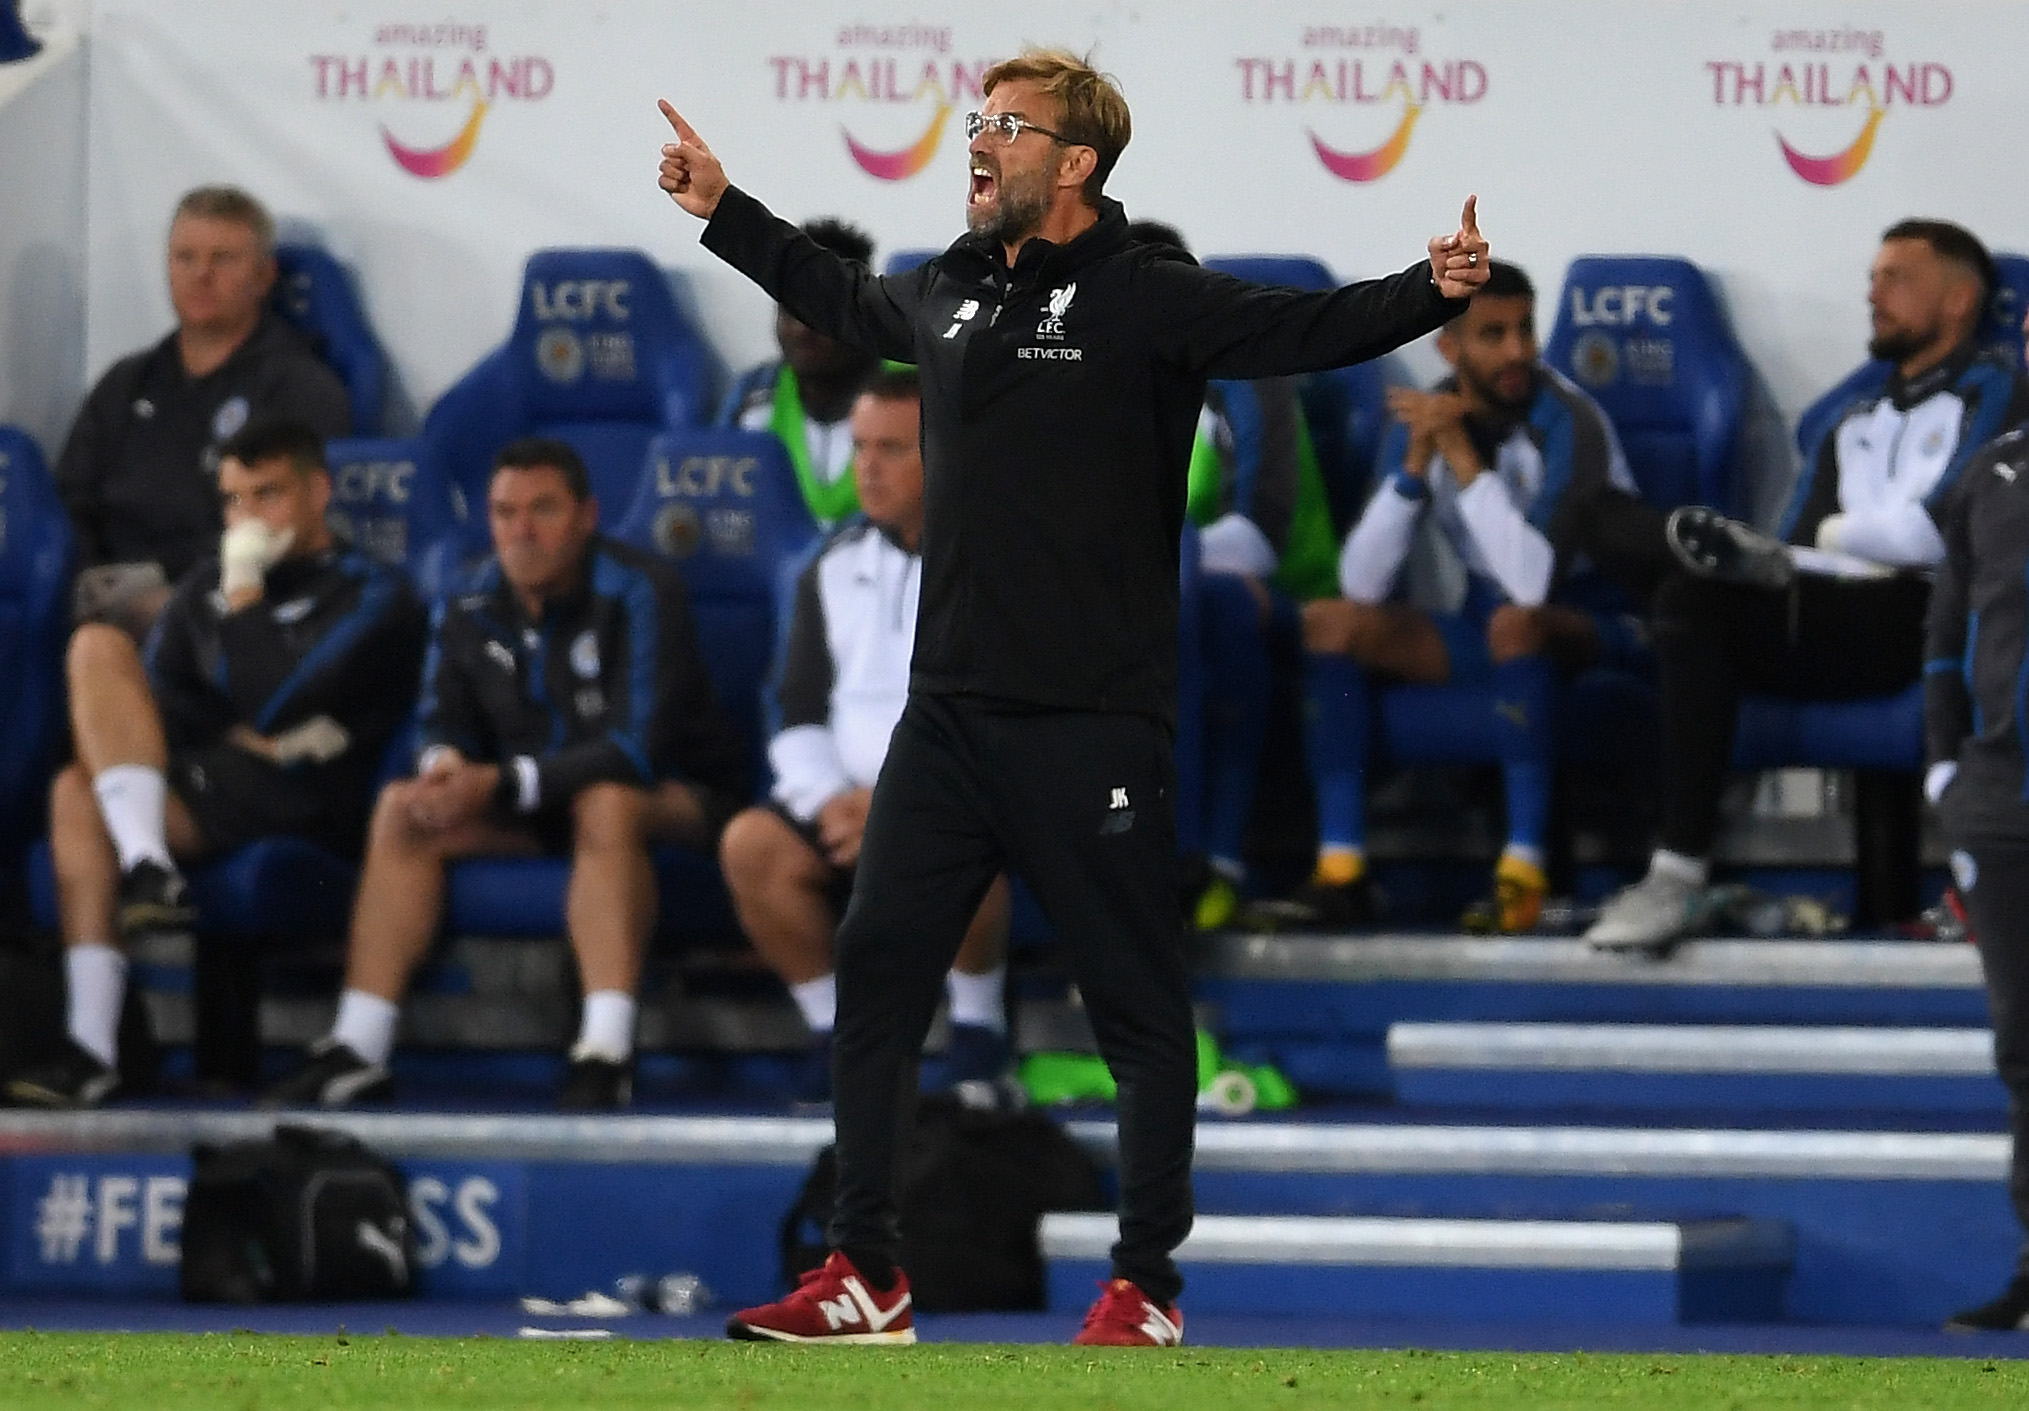 LEICESTER, ENGLAND - SEPTEMBER 23:  Jurgen Klopp, Manager of Liverpool gives his team instructions during the Premier League match between Leicester City and Liverpool at The King Power Stadium on September 23, 2017 in Leicester, England.  (Photo by Laurence Griffiths/Getty Images)